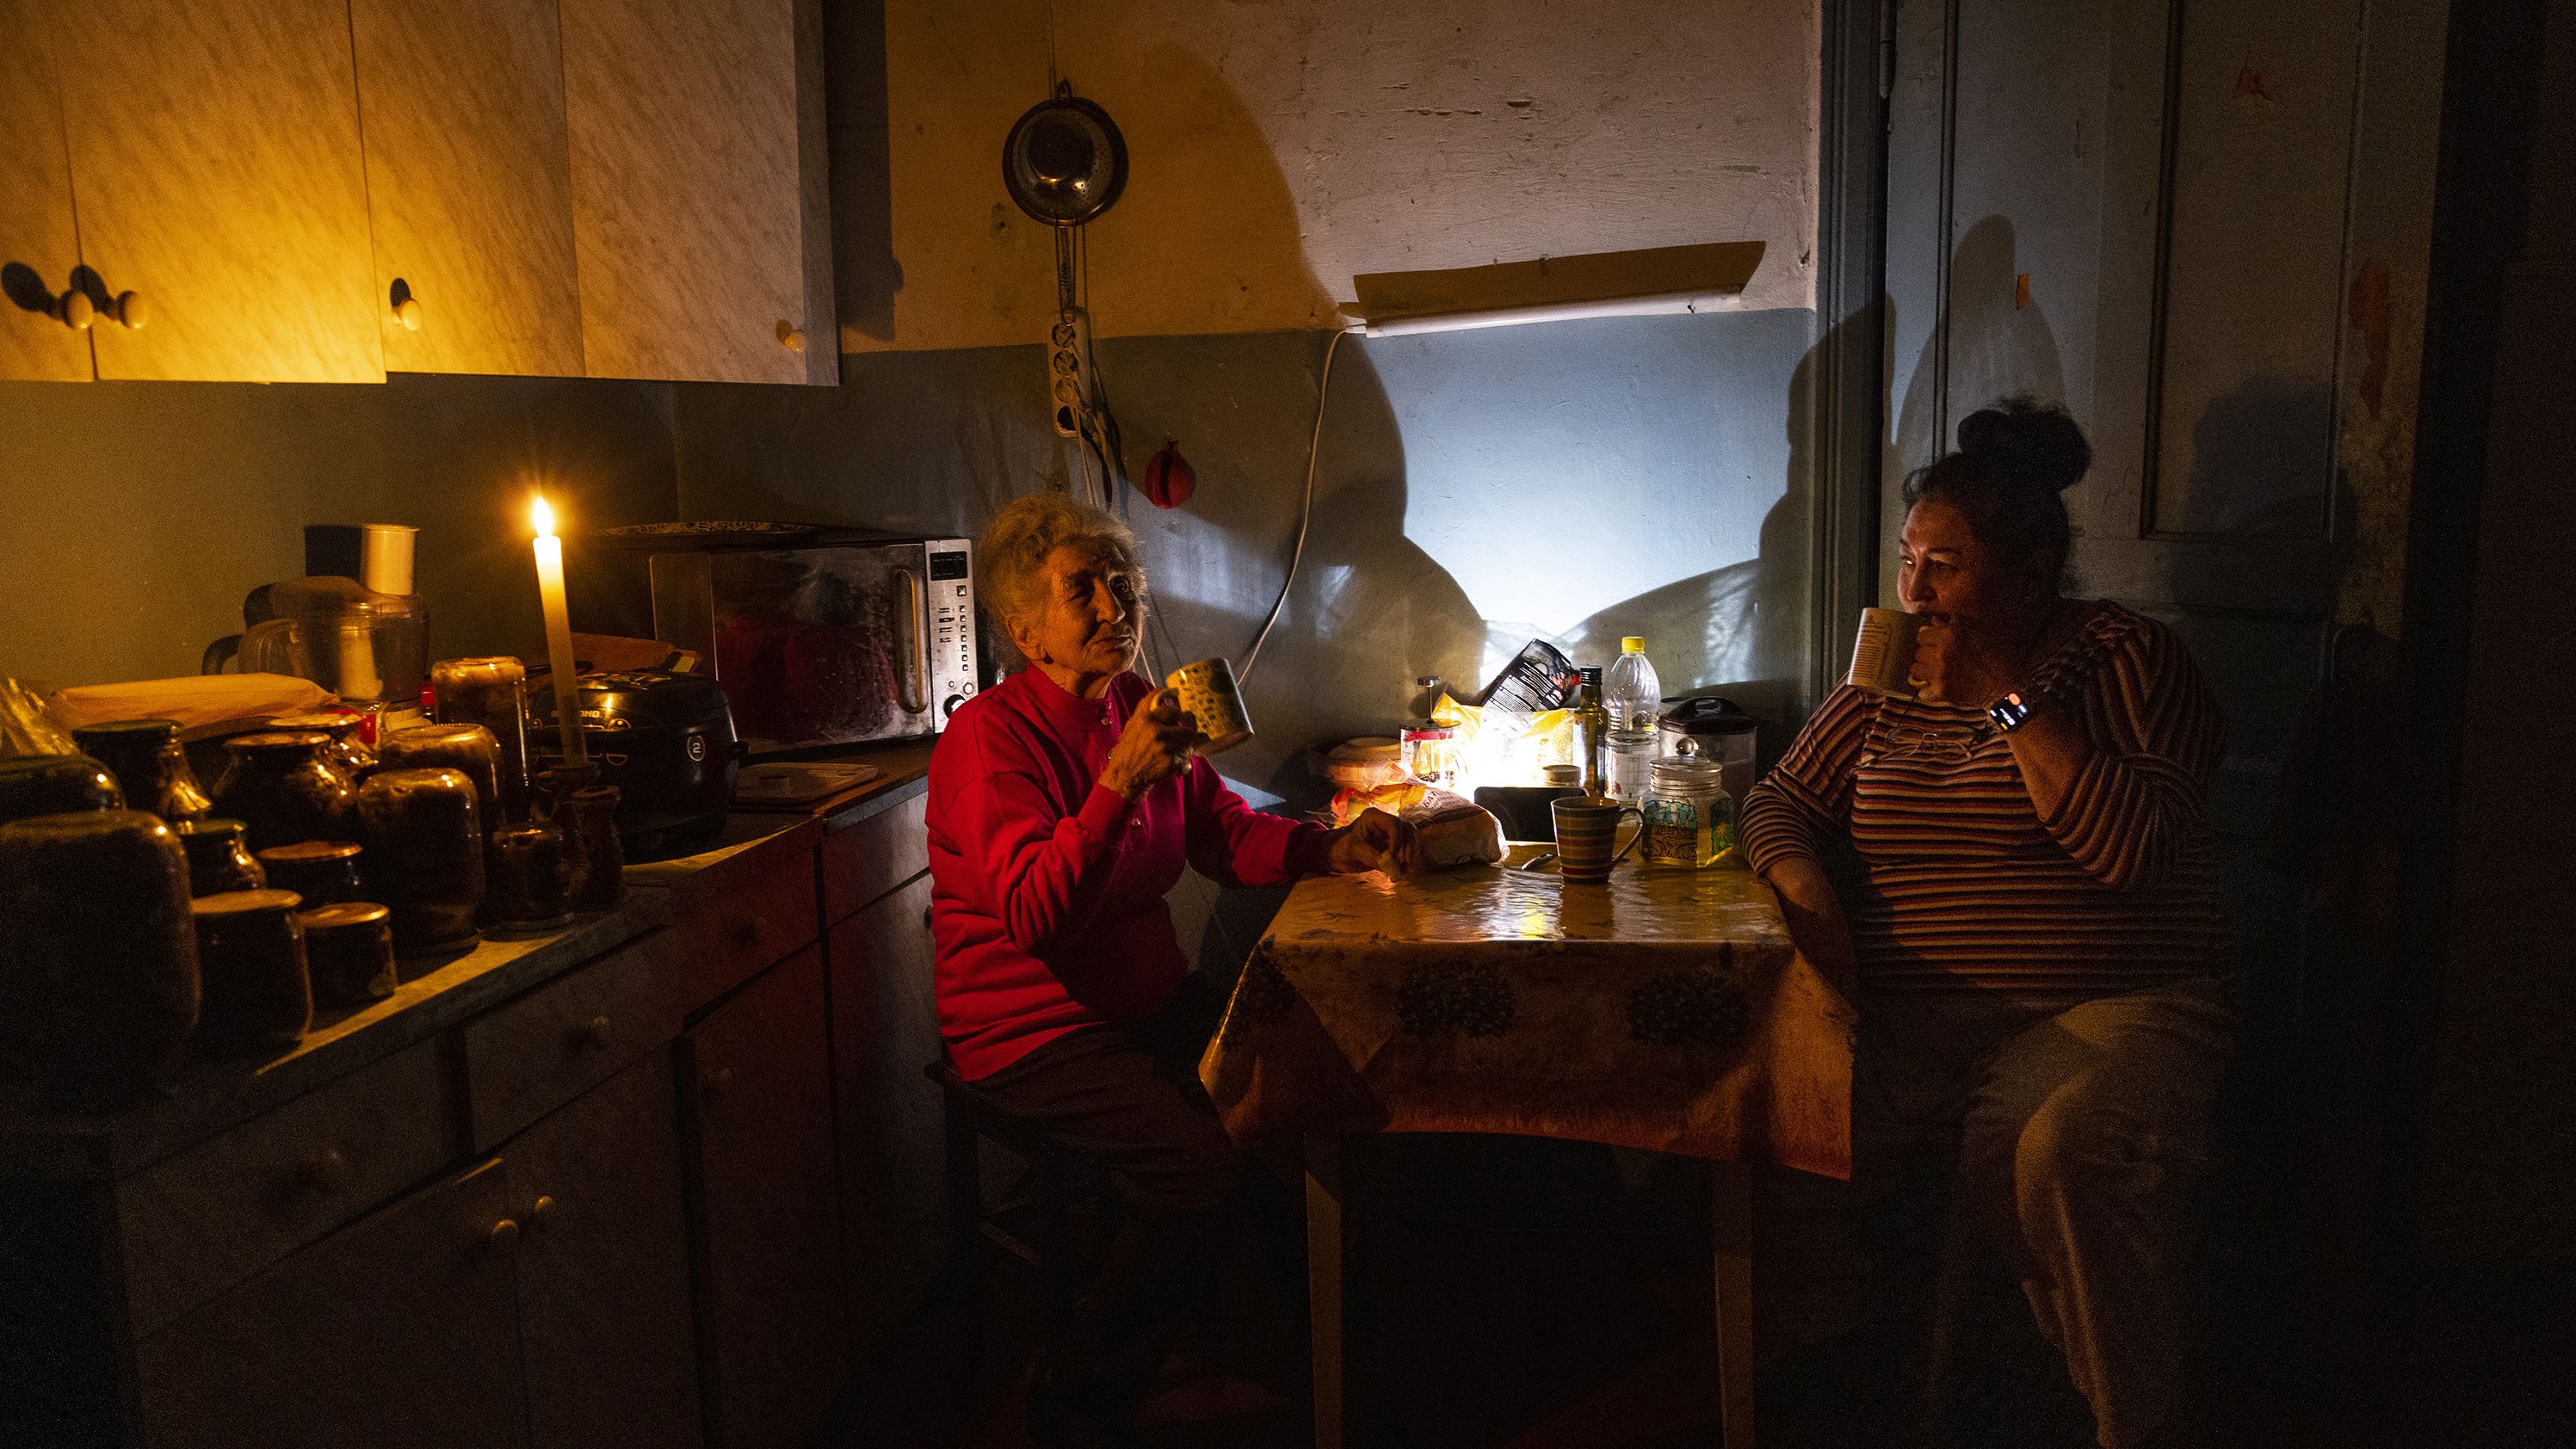 Natalia Zemko, 81, talks with her daughter Lesya as they drink tea in their kitchen during a power outage in downtown Kyiv on October 22.